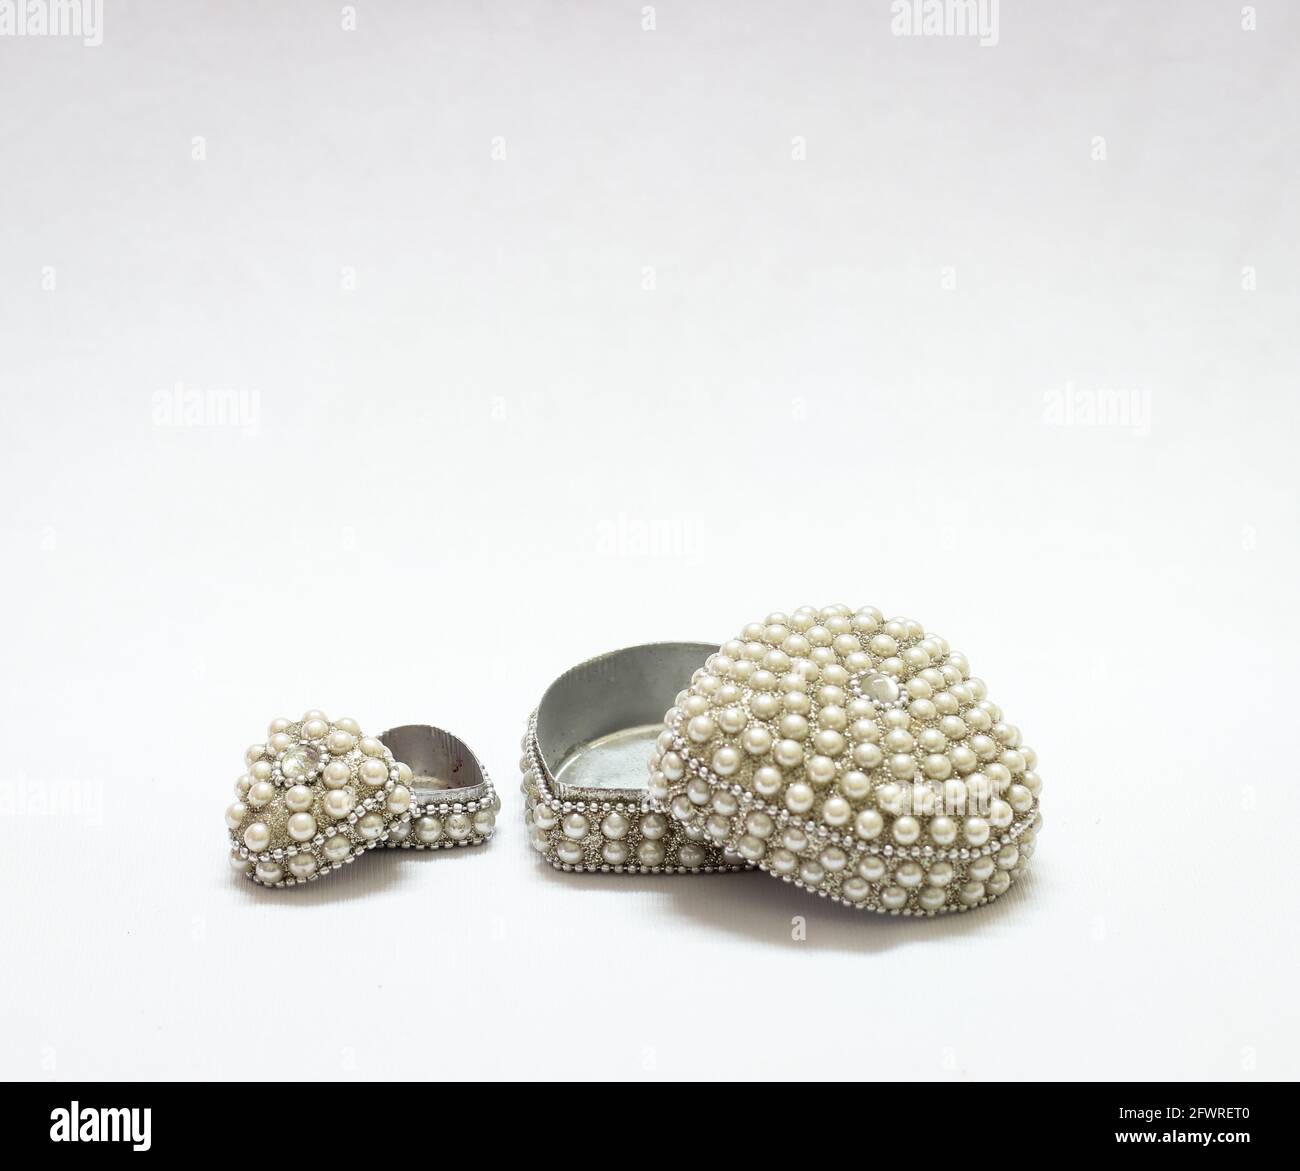 expensive antique jewelry box decorated with pearls isolated in a white background Stock Photo